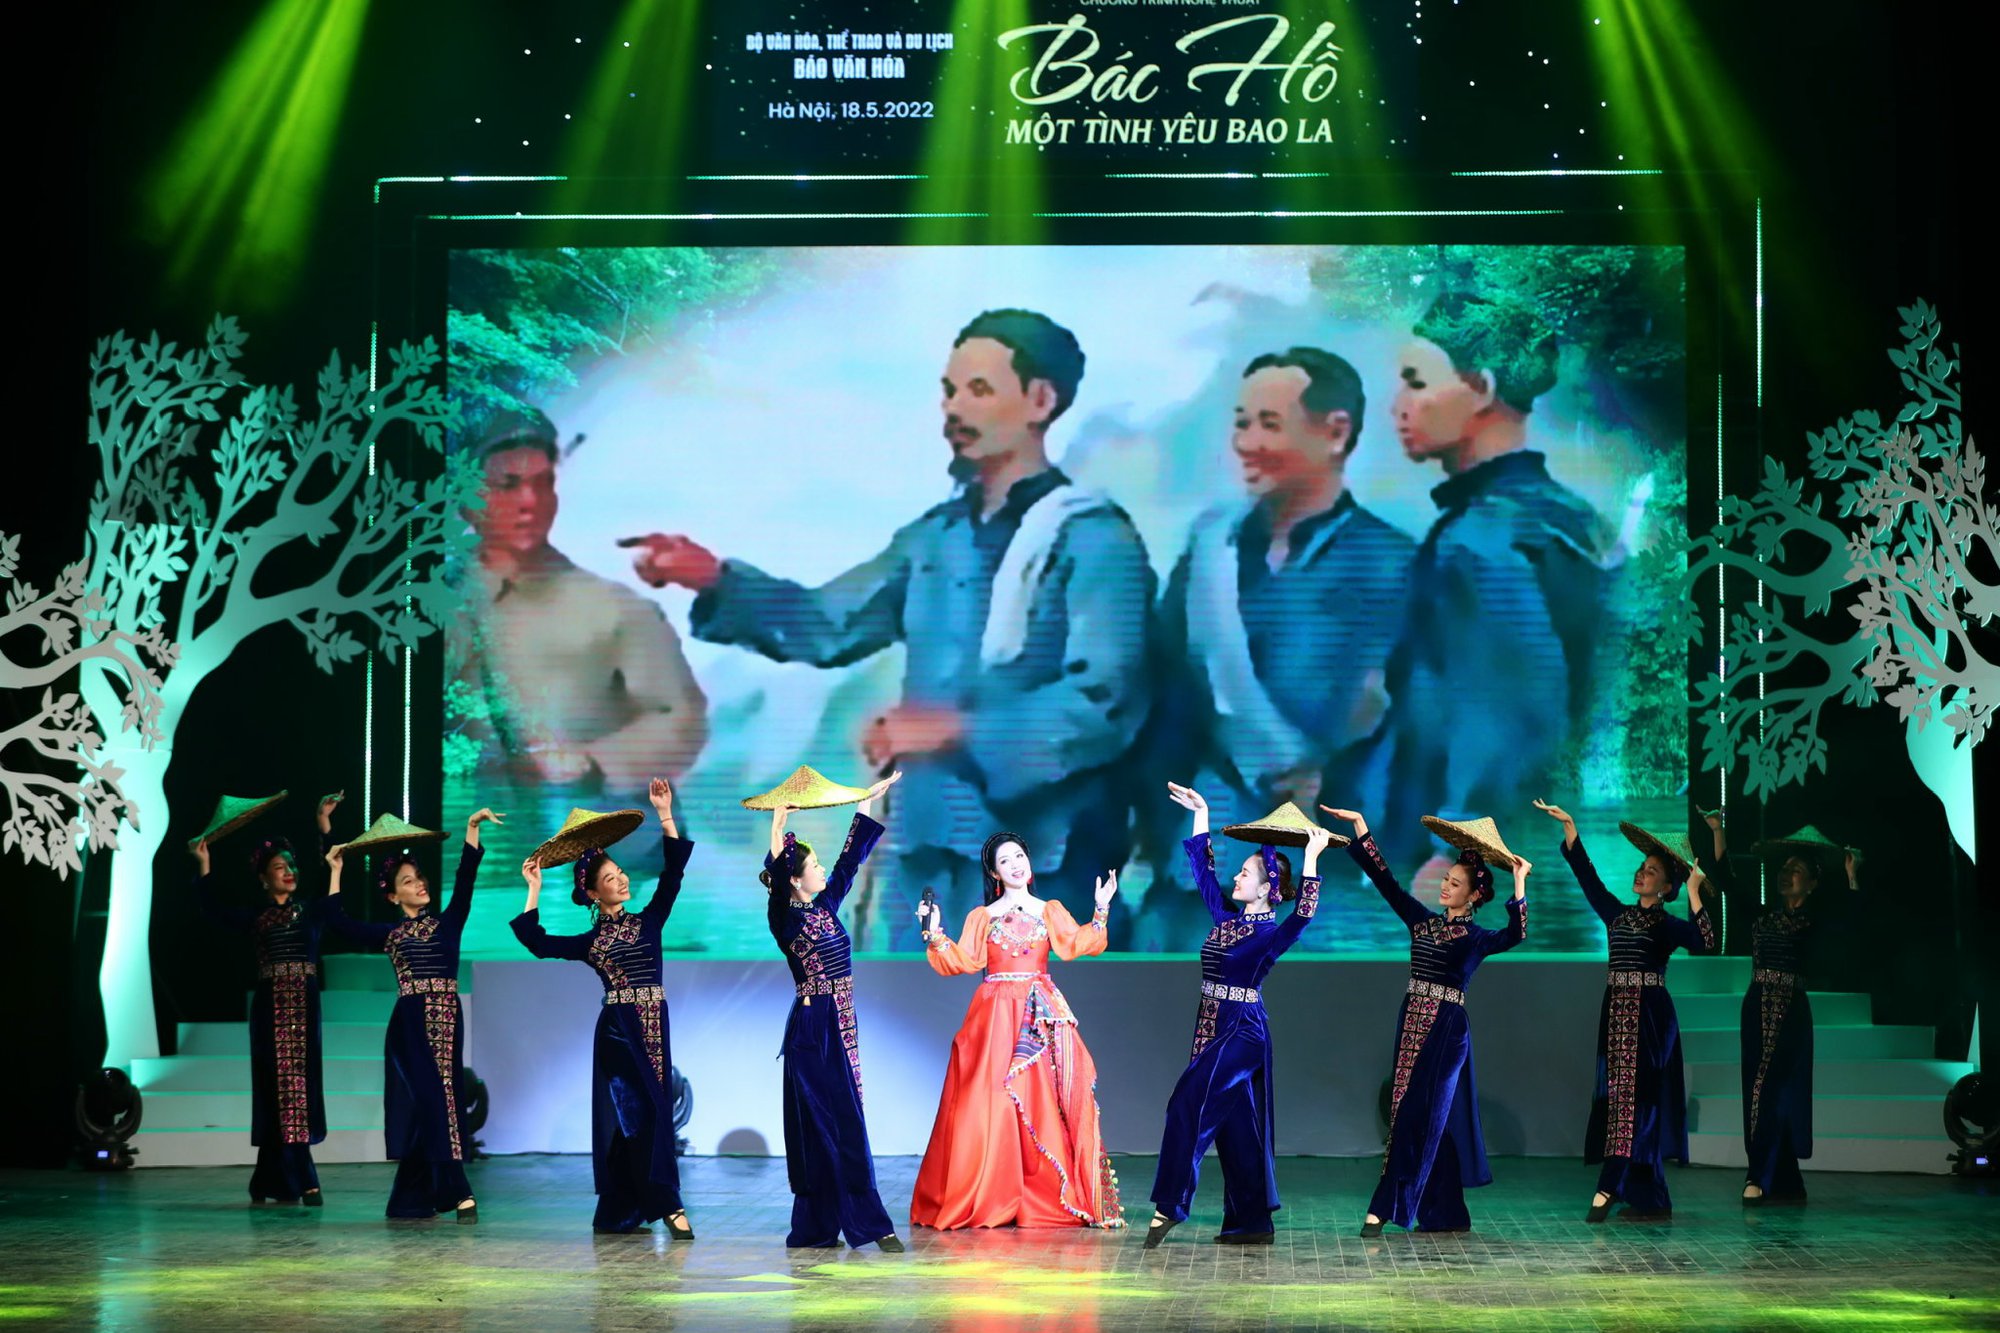 Anh Tho, Phuong Nga, Ploong Thiet... were filled with emotions when singing about dear Uncle Ho - Photo 1.